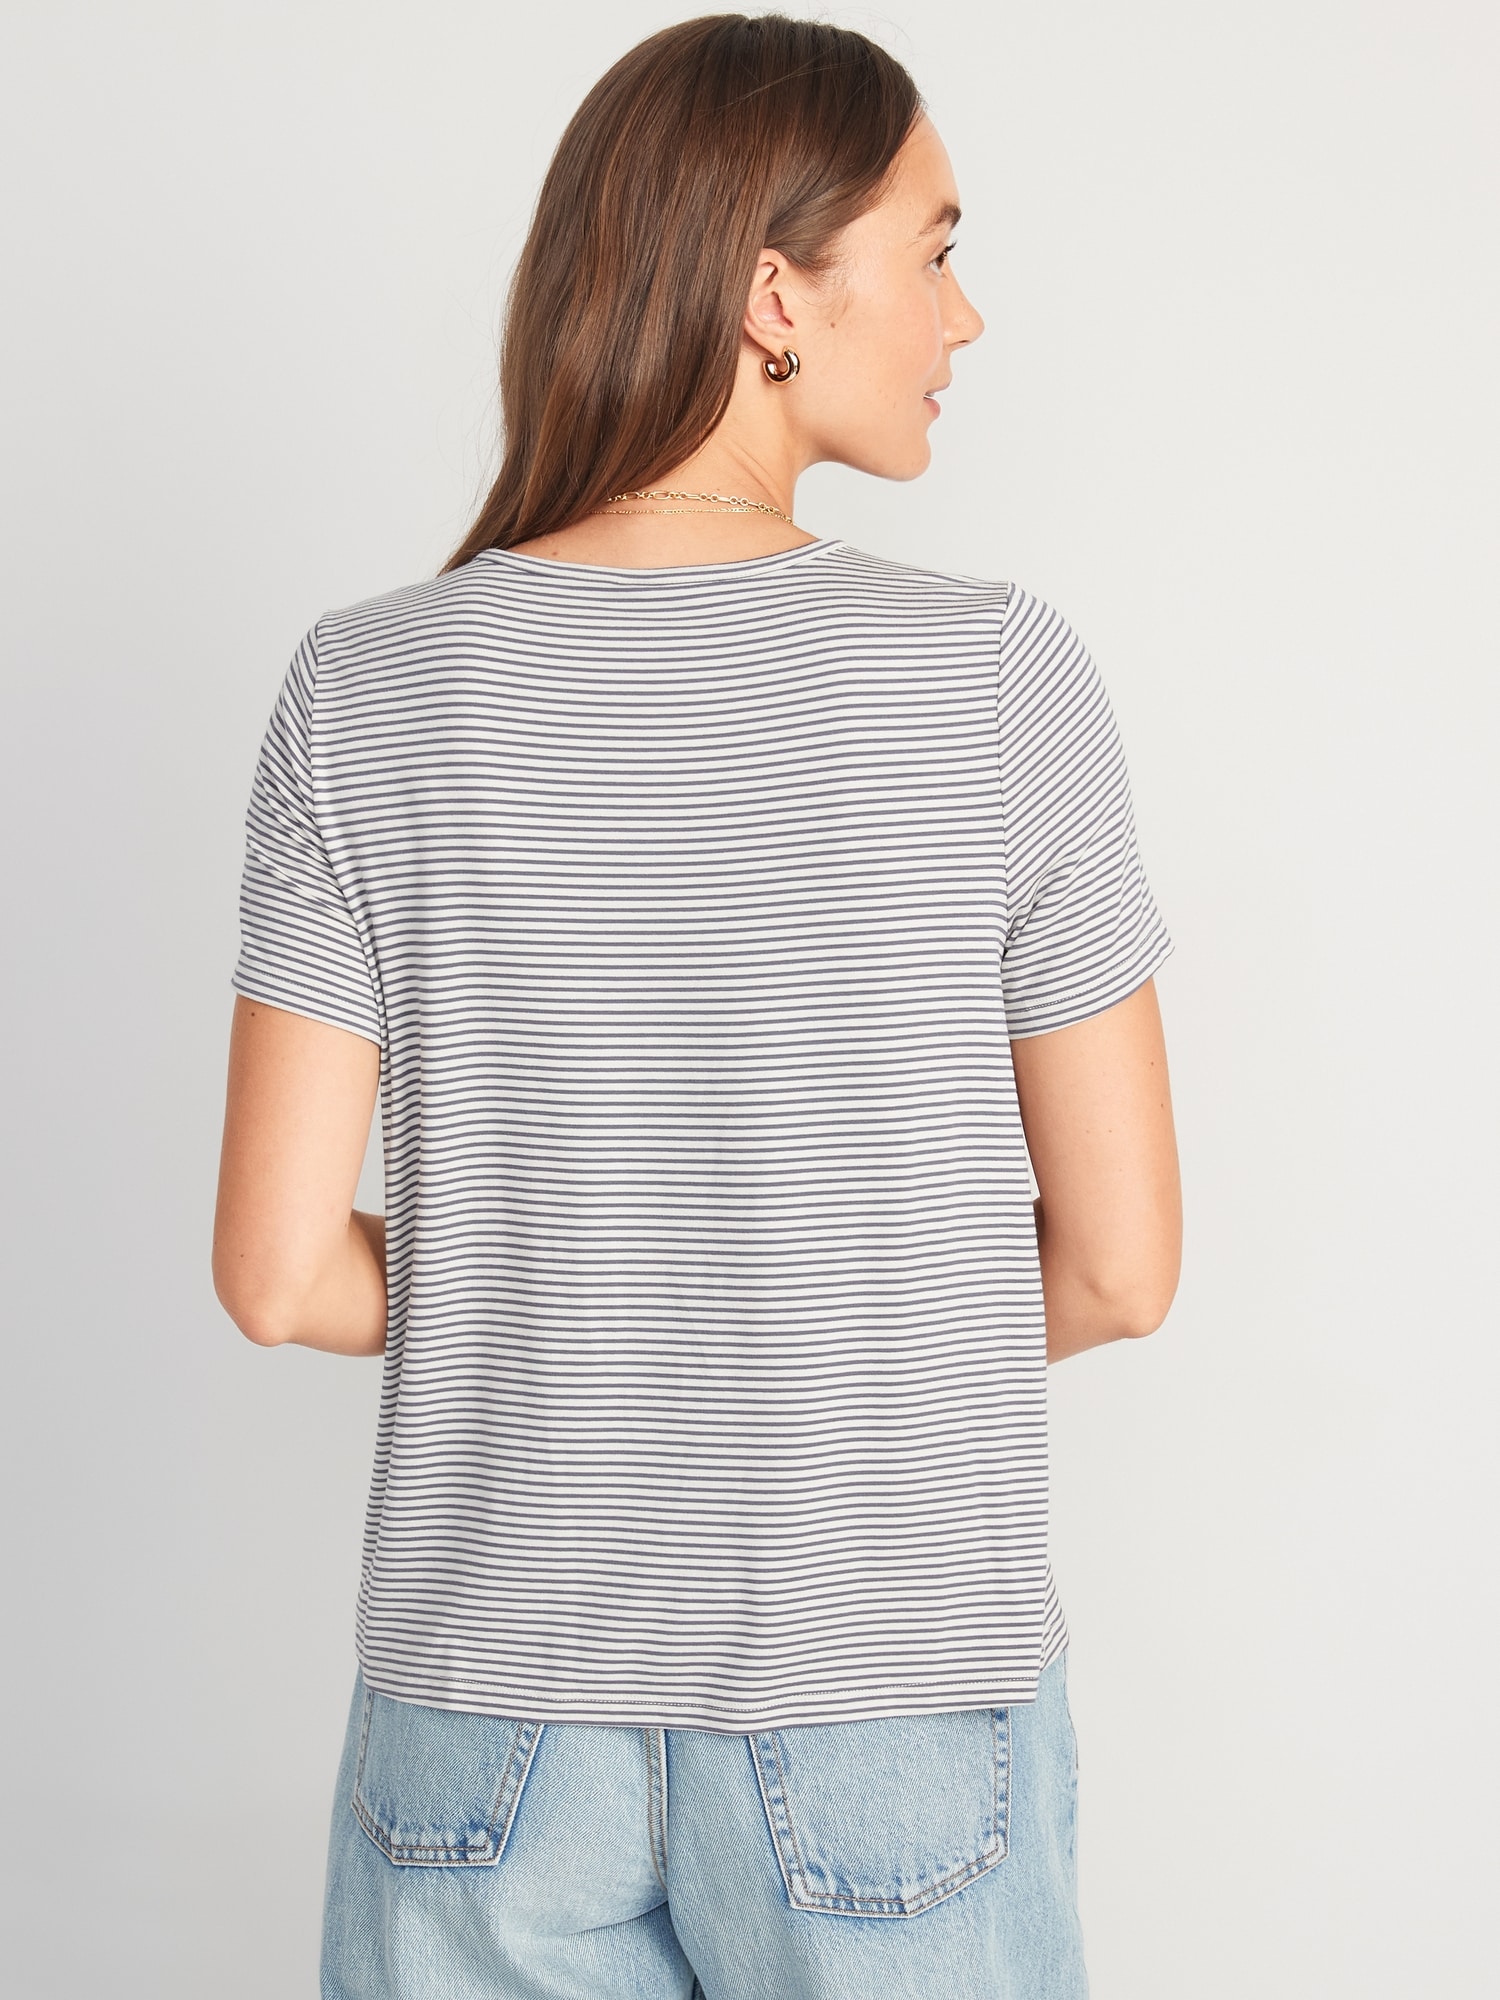 Striped | T-Shirt Luxe Navy Old for Women